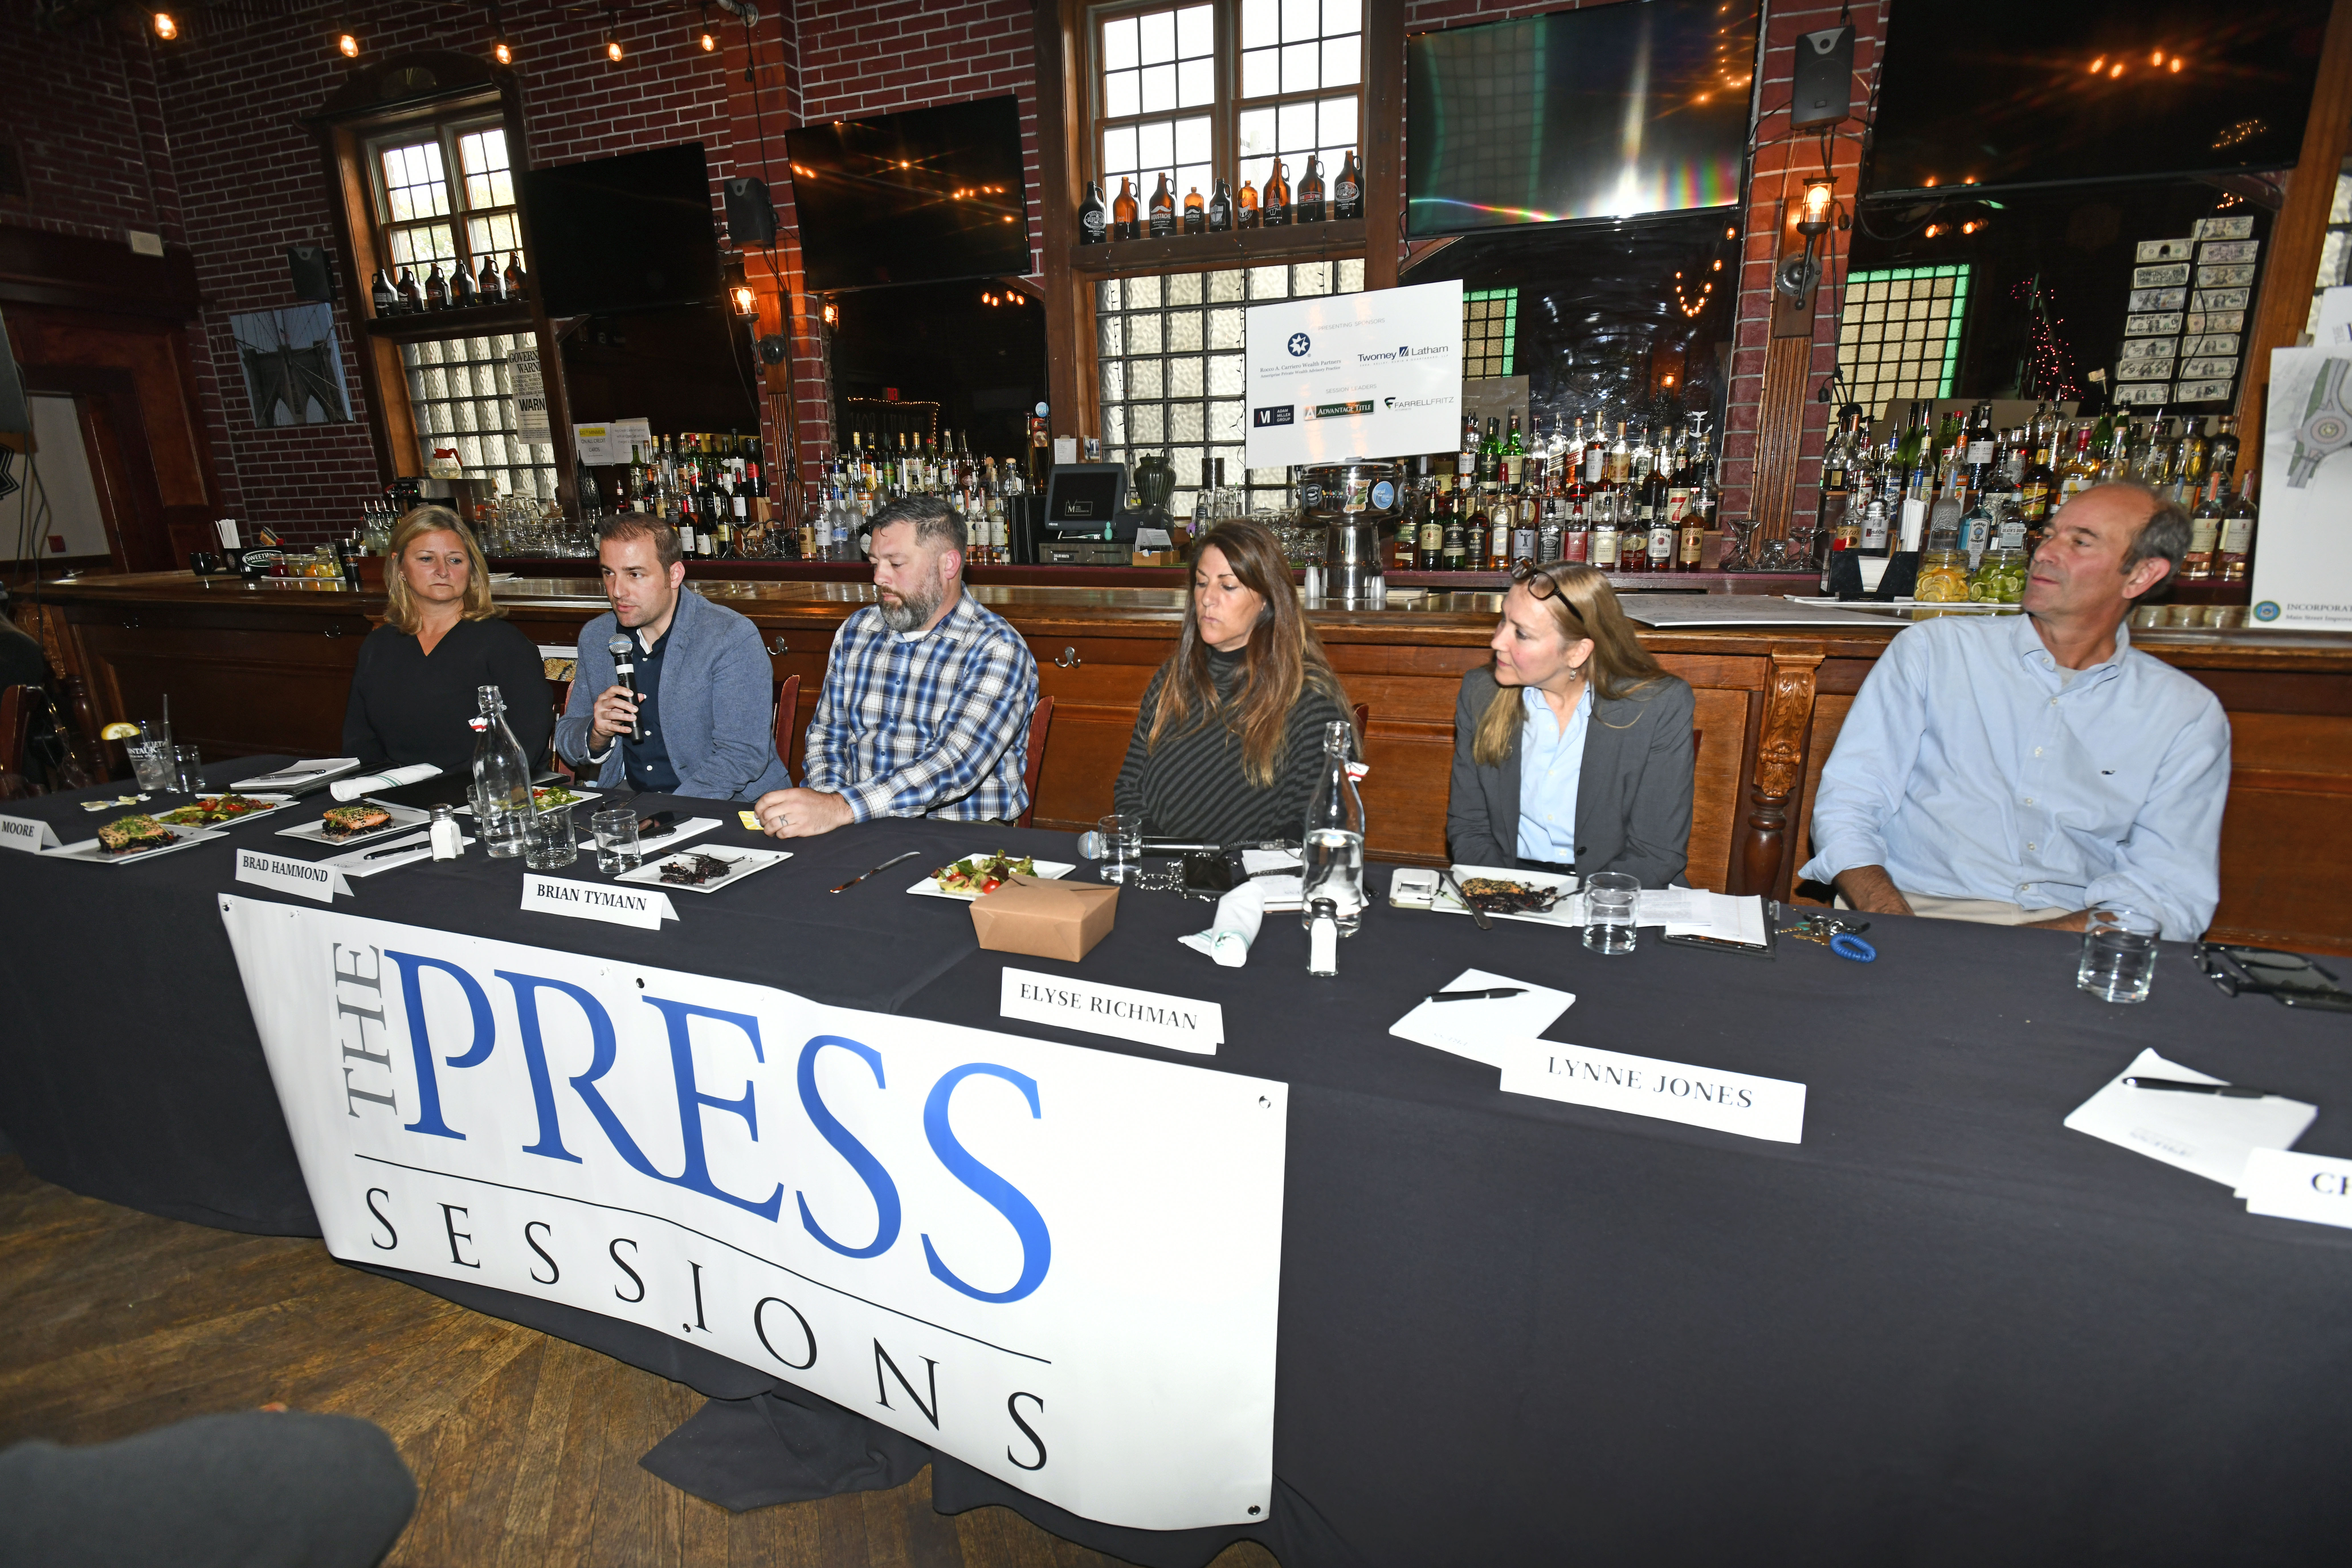 The panel at the Press Session, 